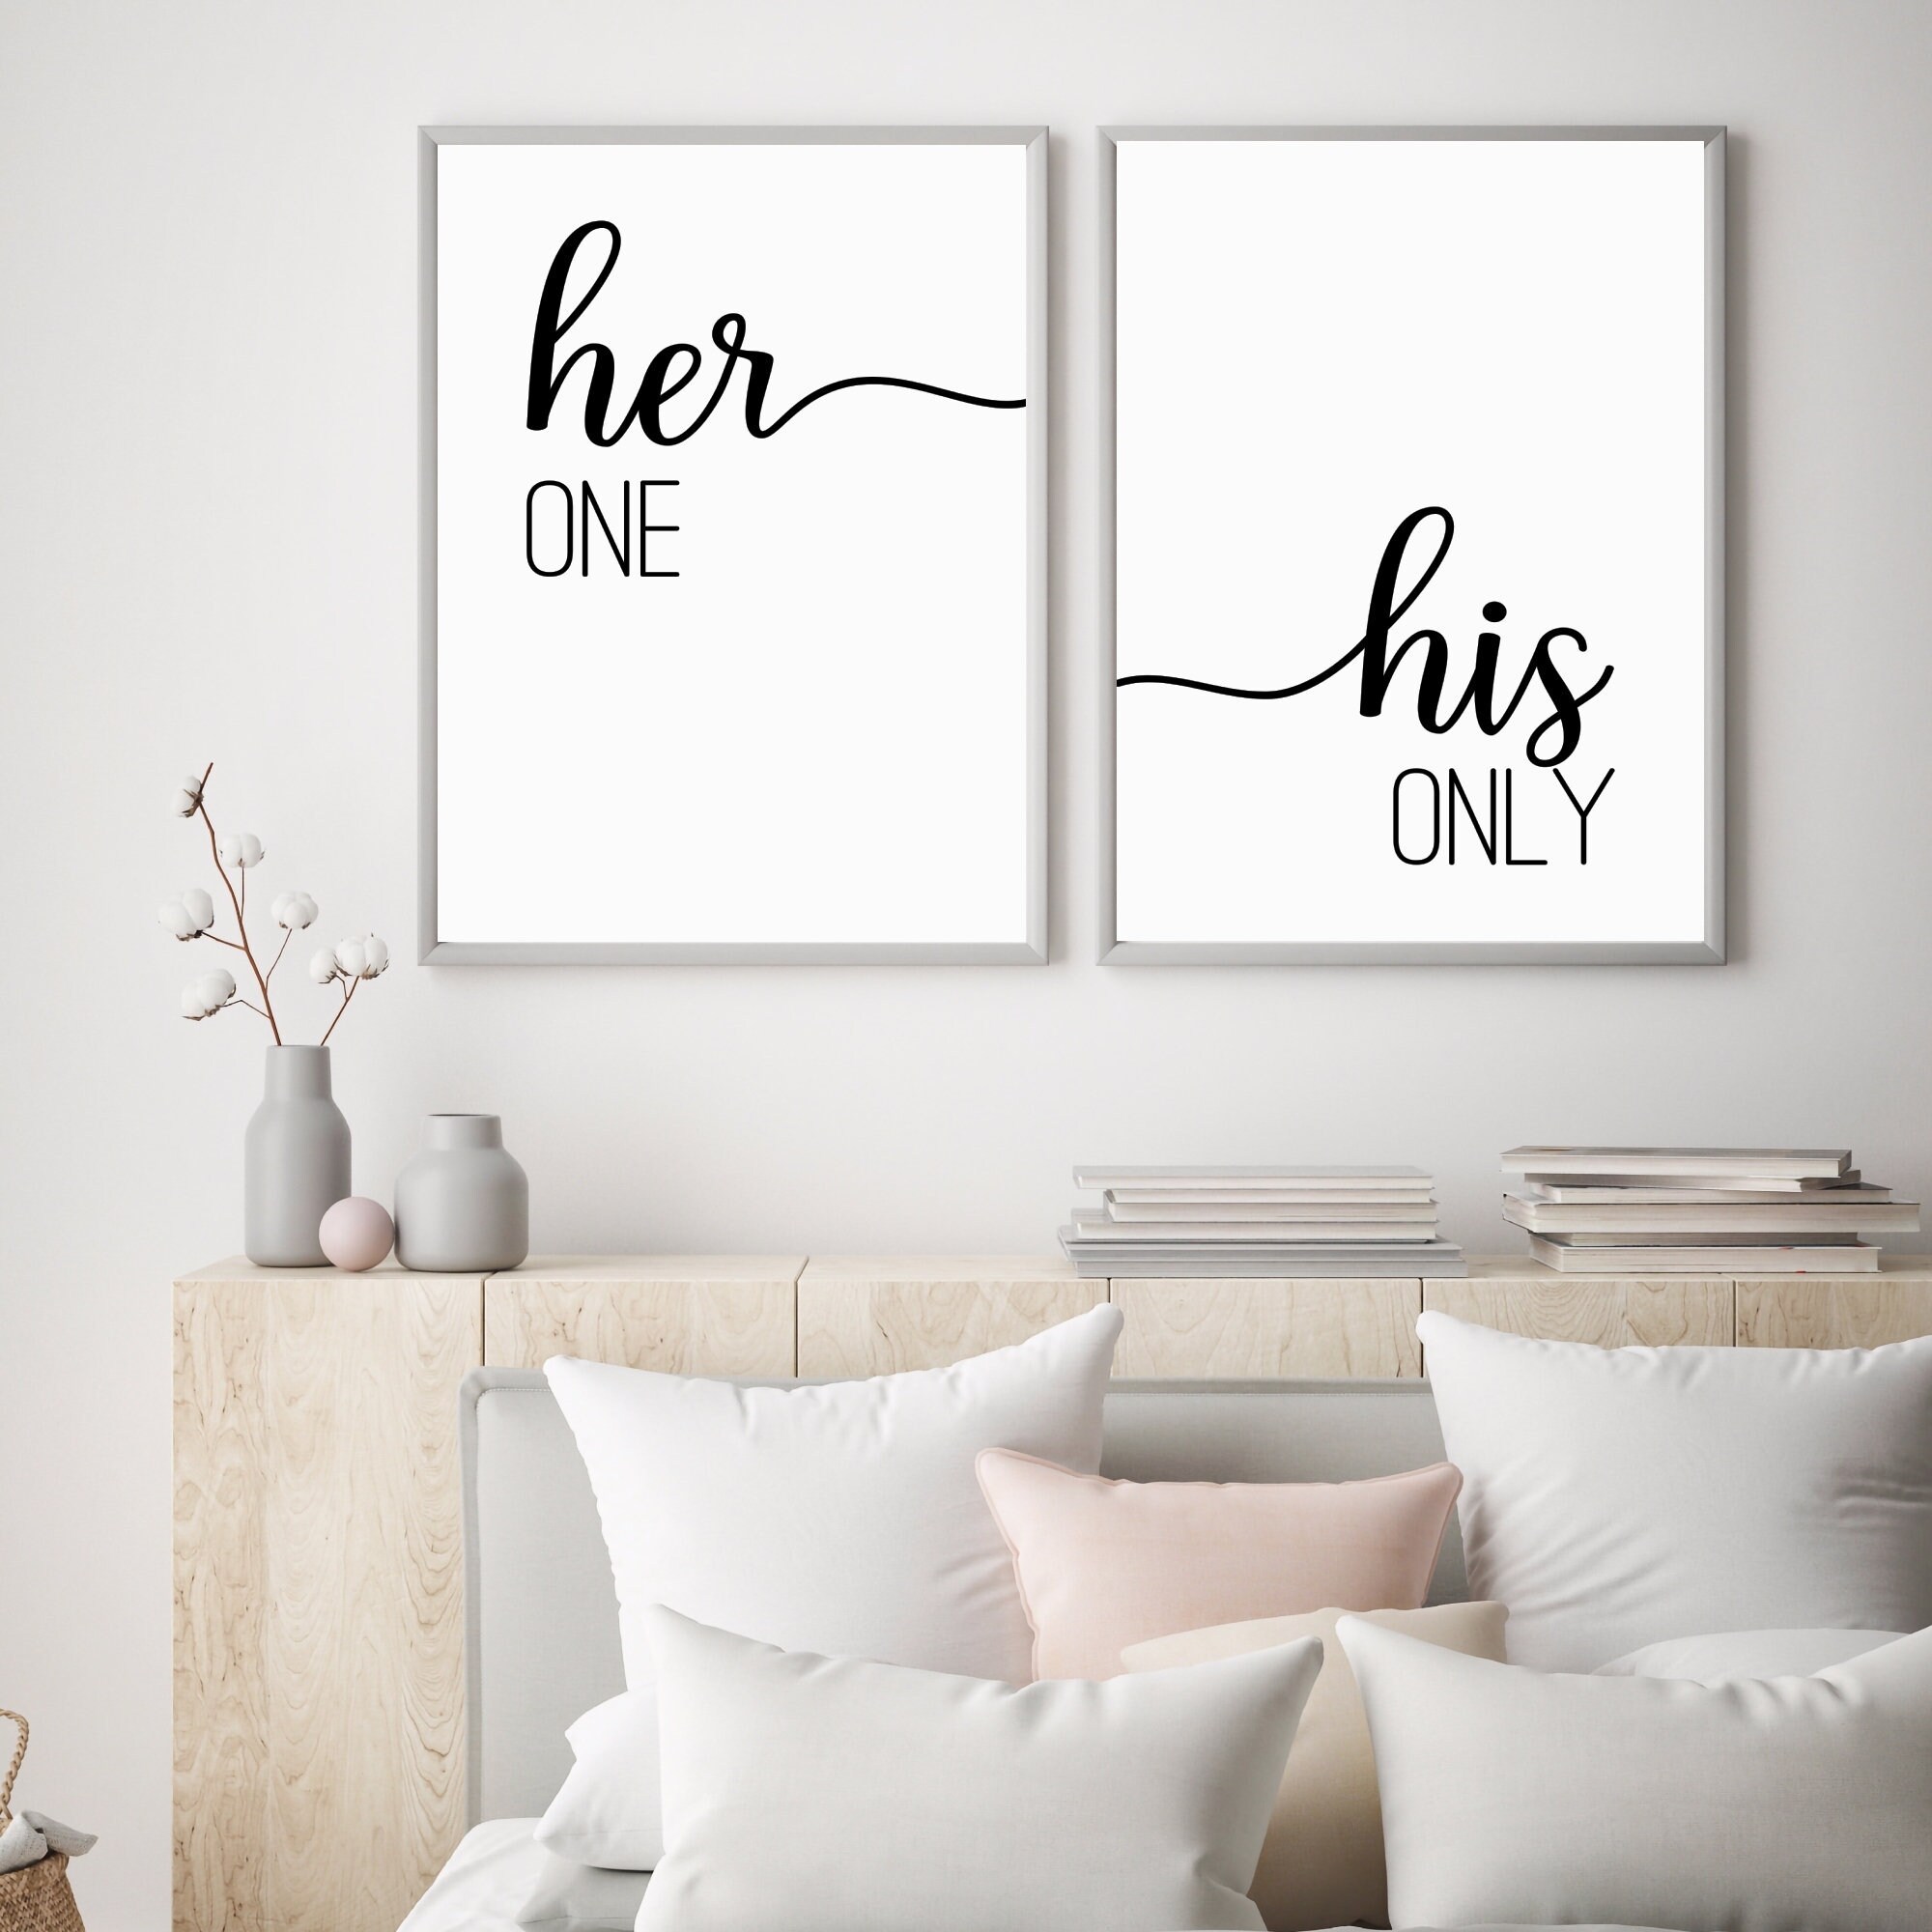 Her One His Only Printable Art Set of 2 Wall Art Couple | Etsy